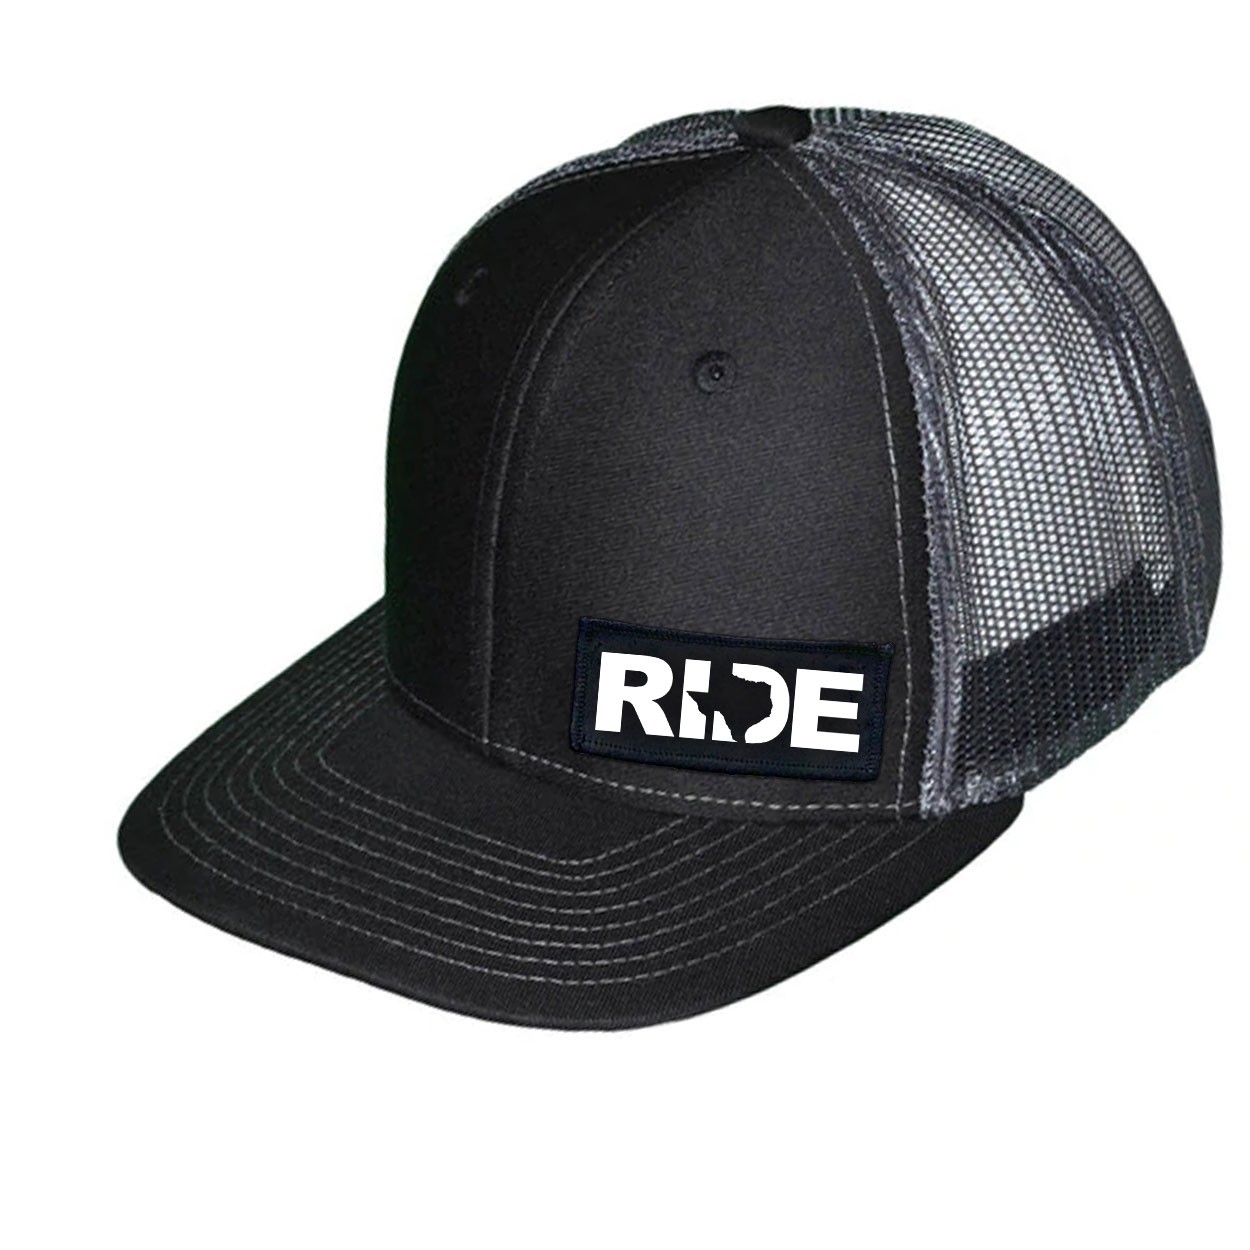 Ride Texas Night Out Woven Patch Snapback Trucker Hat Black/Gray (White Logo)